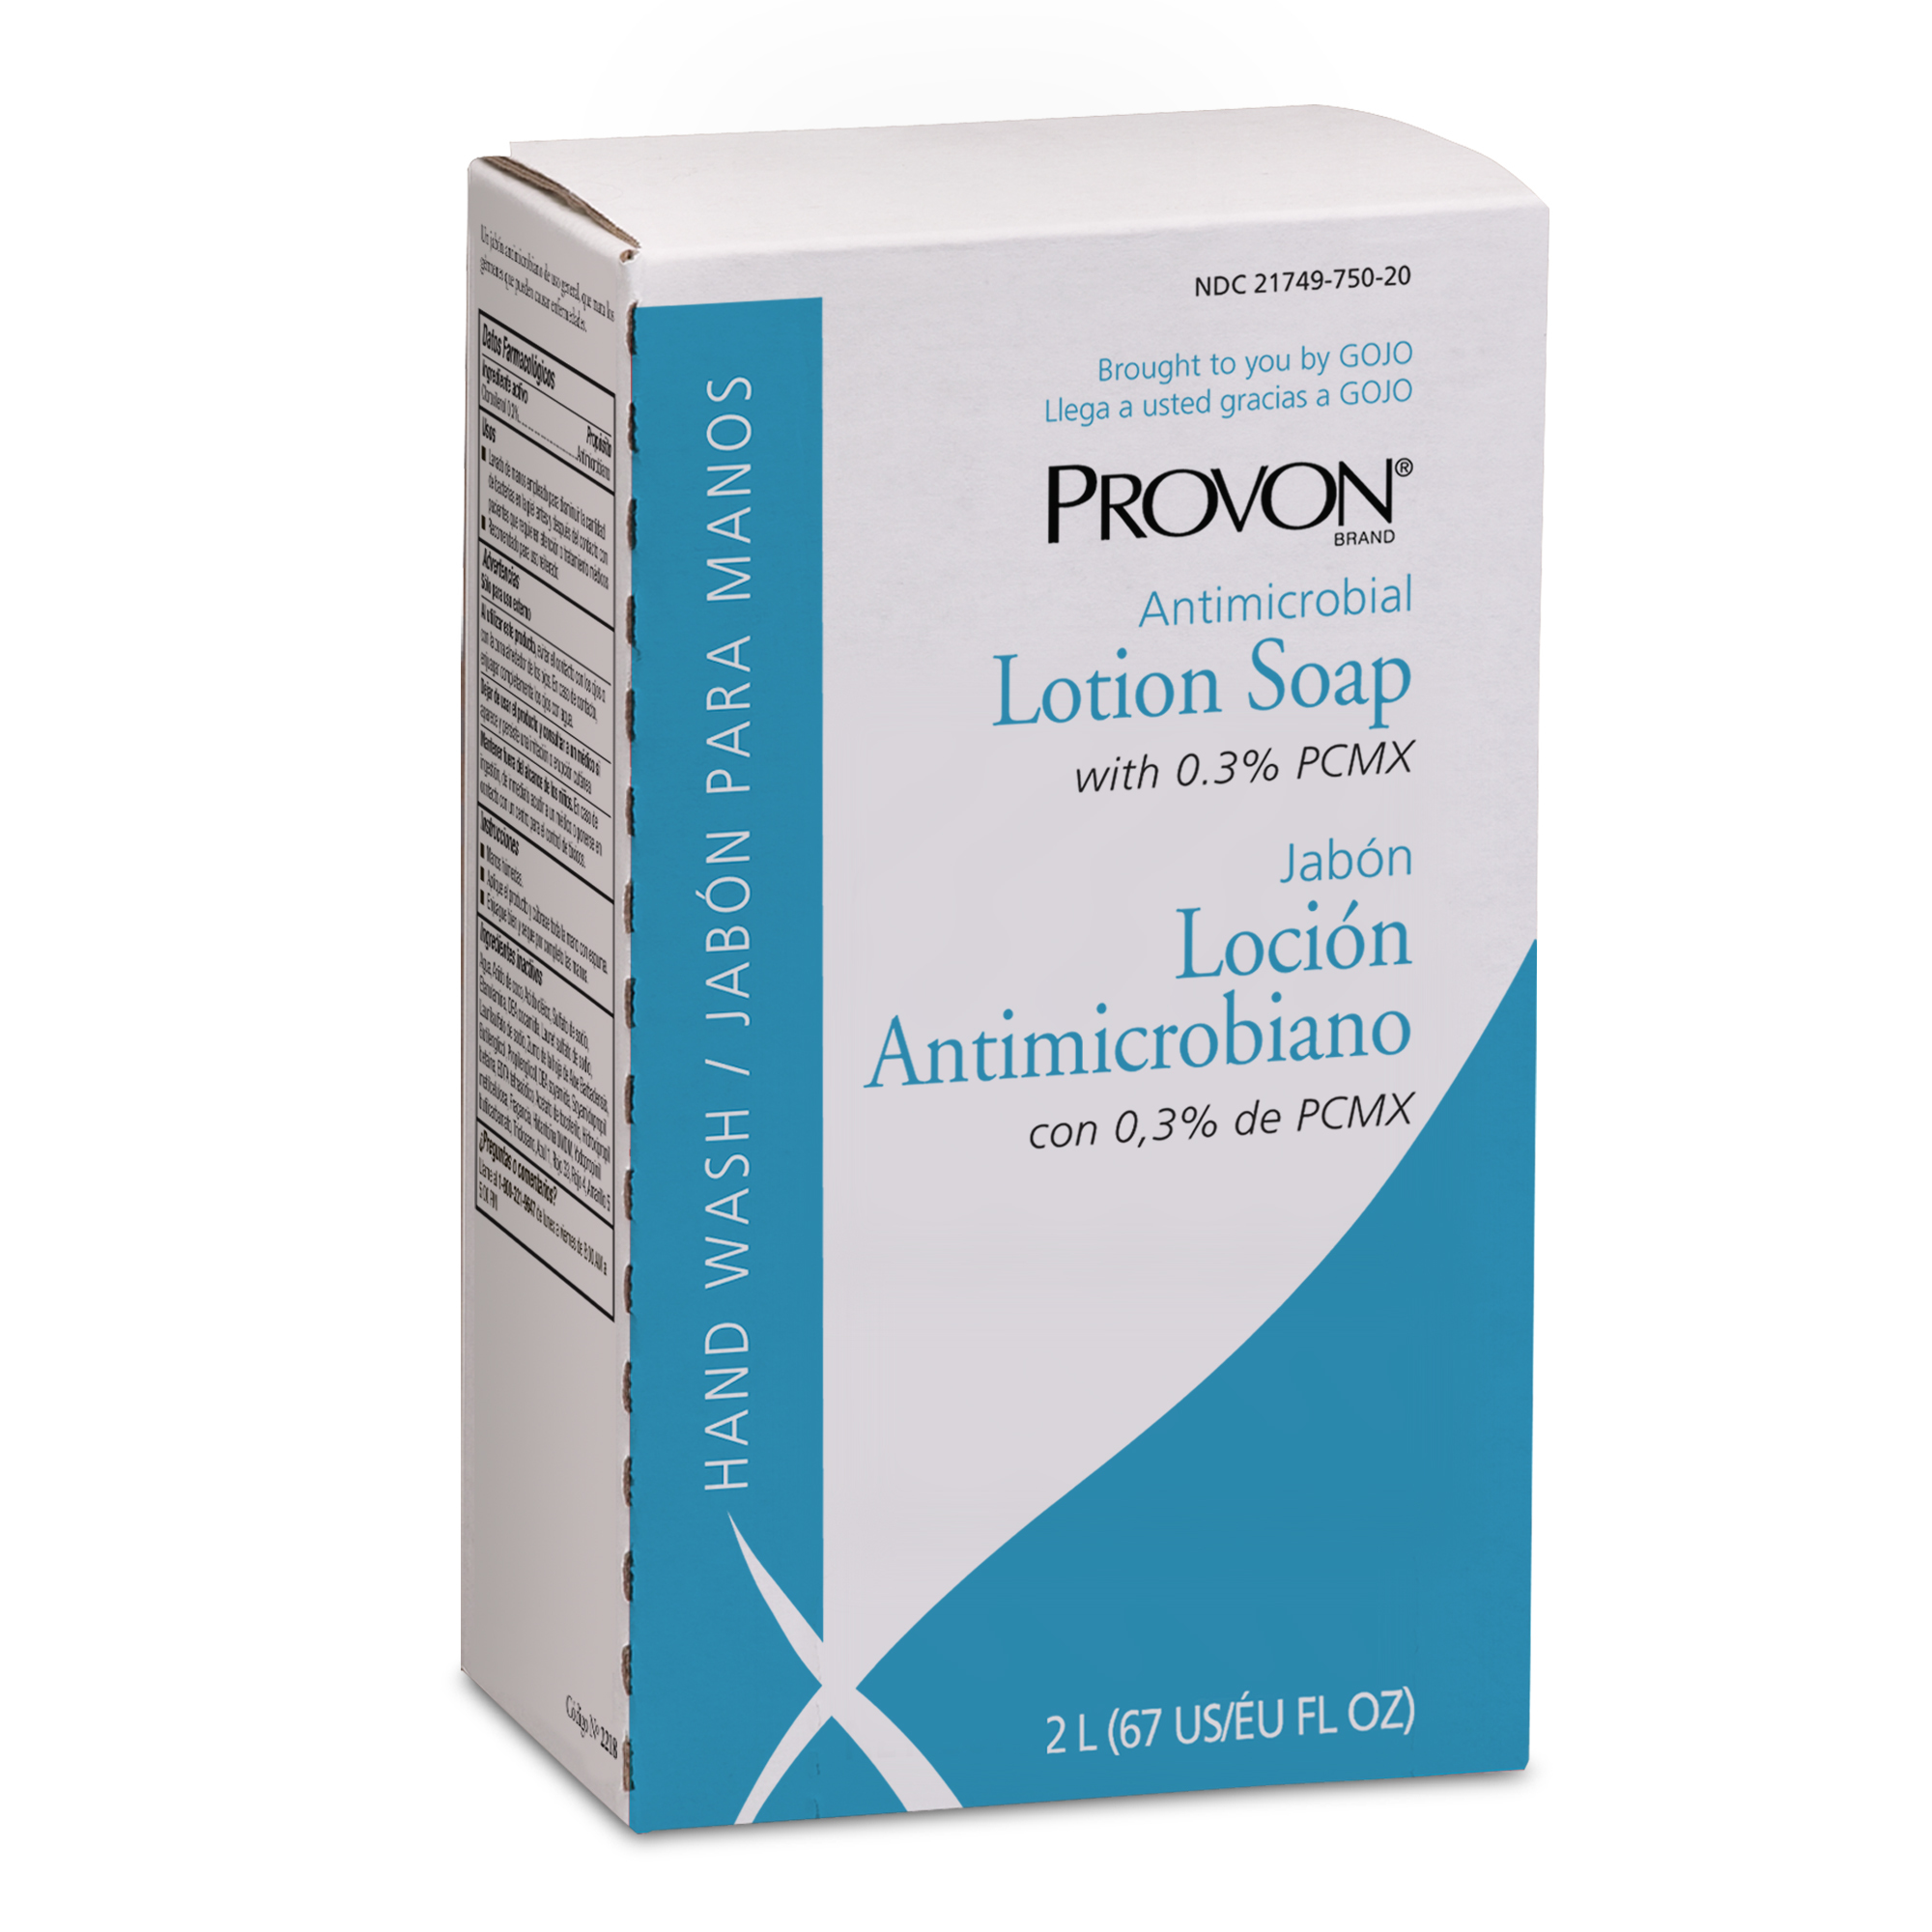 PROVON® Antimicrobial Lotion Soap with 0.3% PCMX 2000 mL